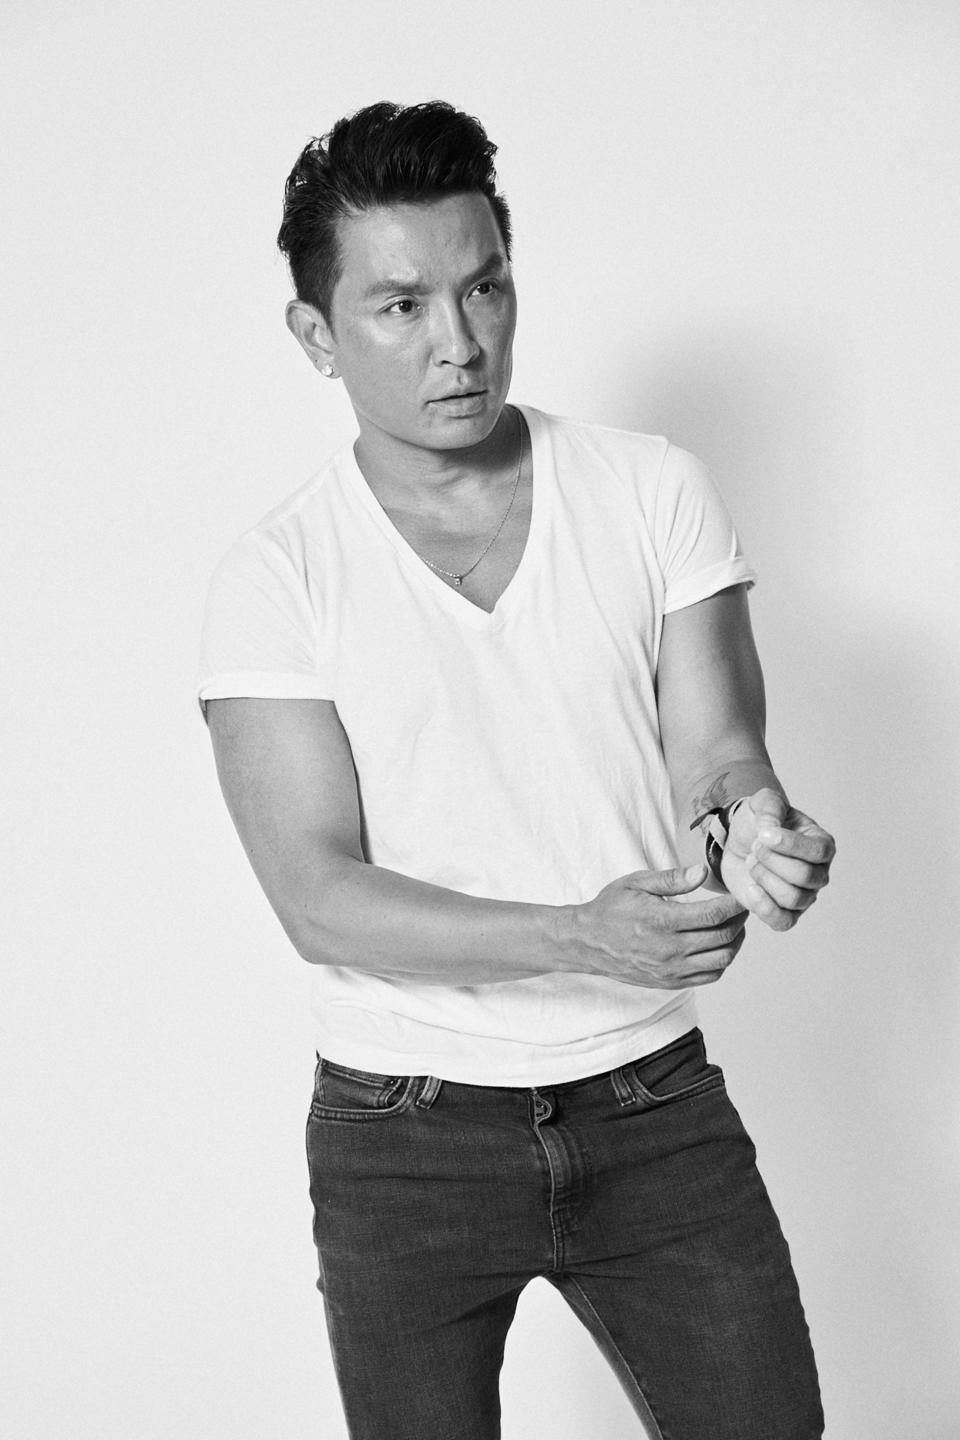 Fashion designer Prabal Gurung is opening up about his life and career journey: "I'm not bigger than the ground I am walking on."